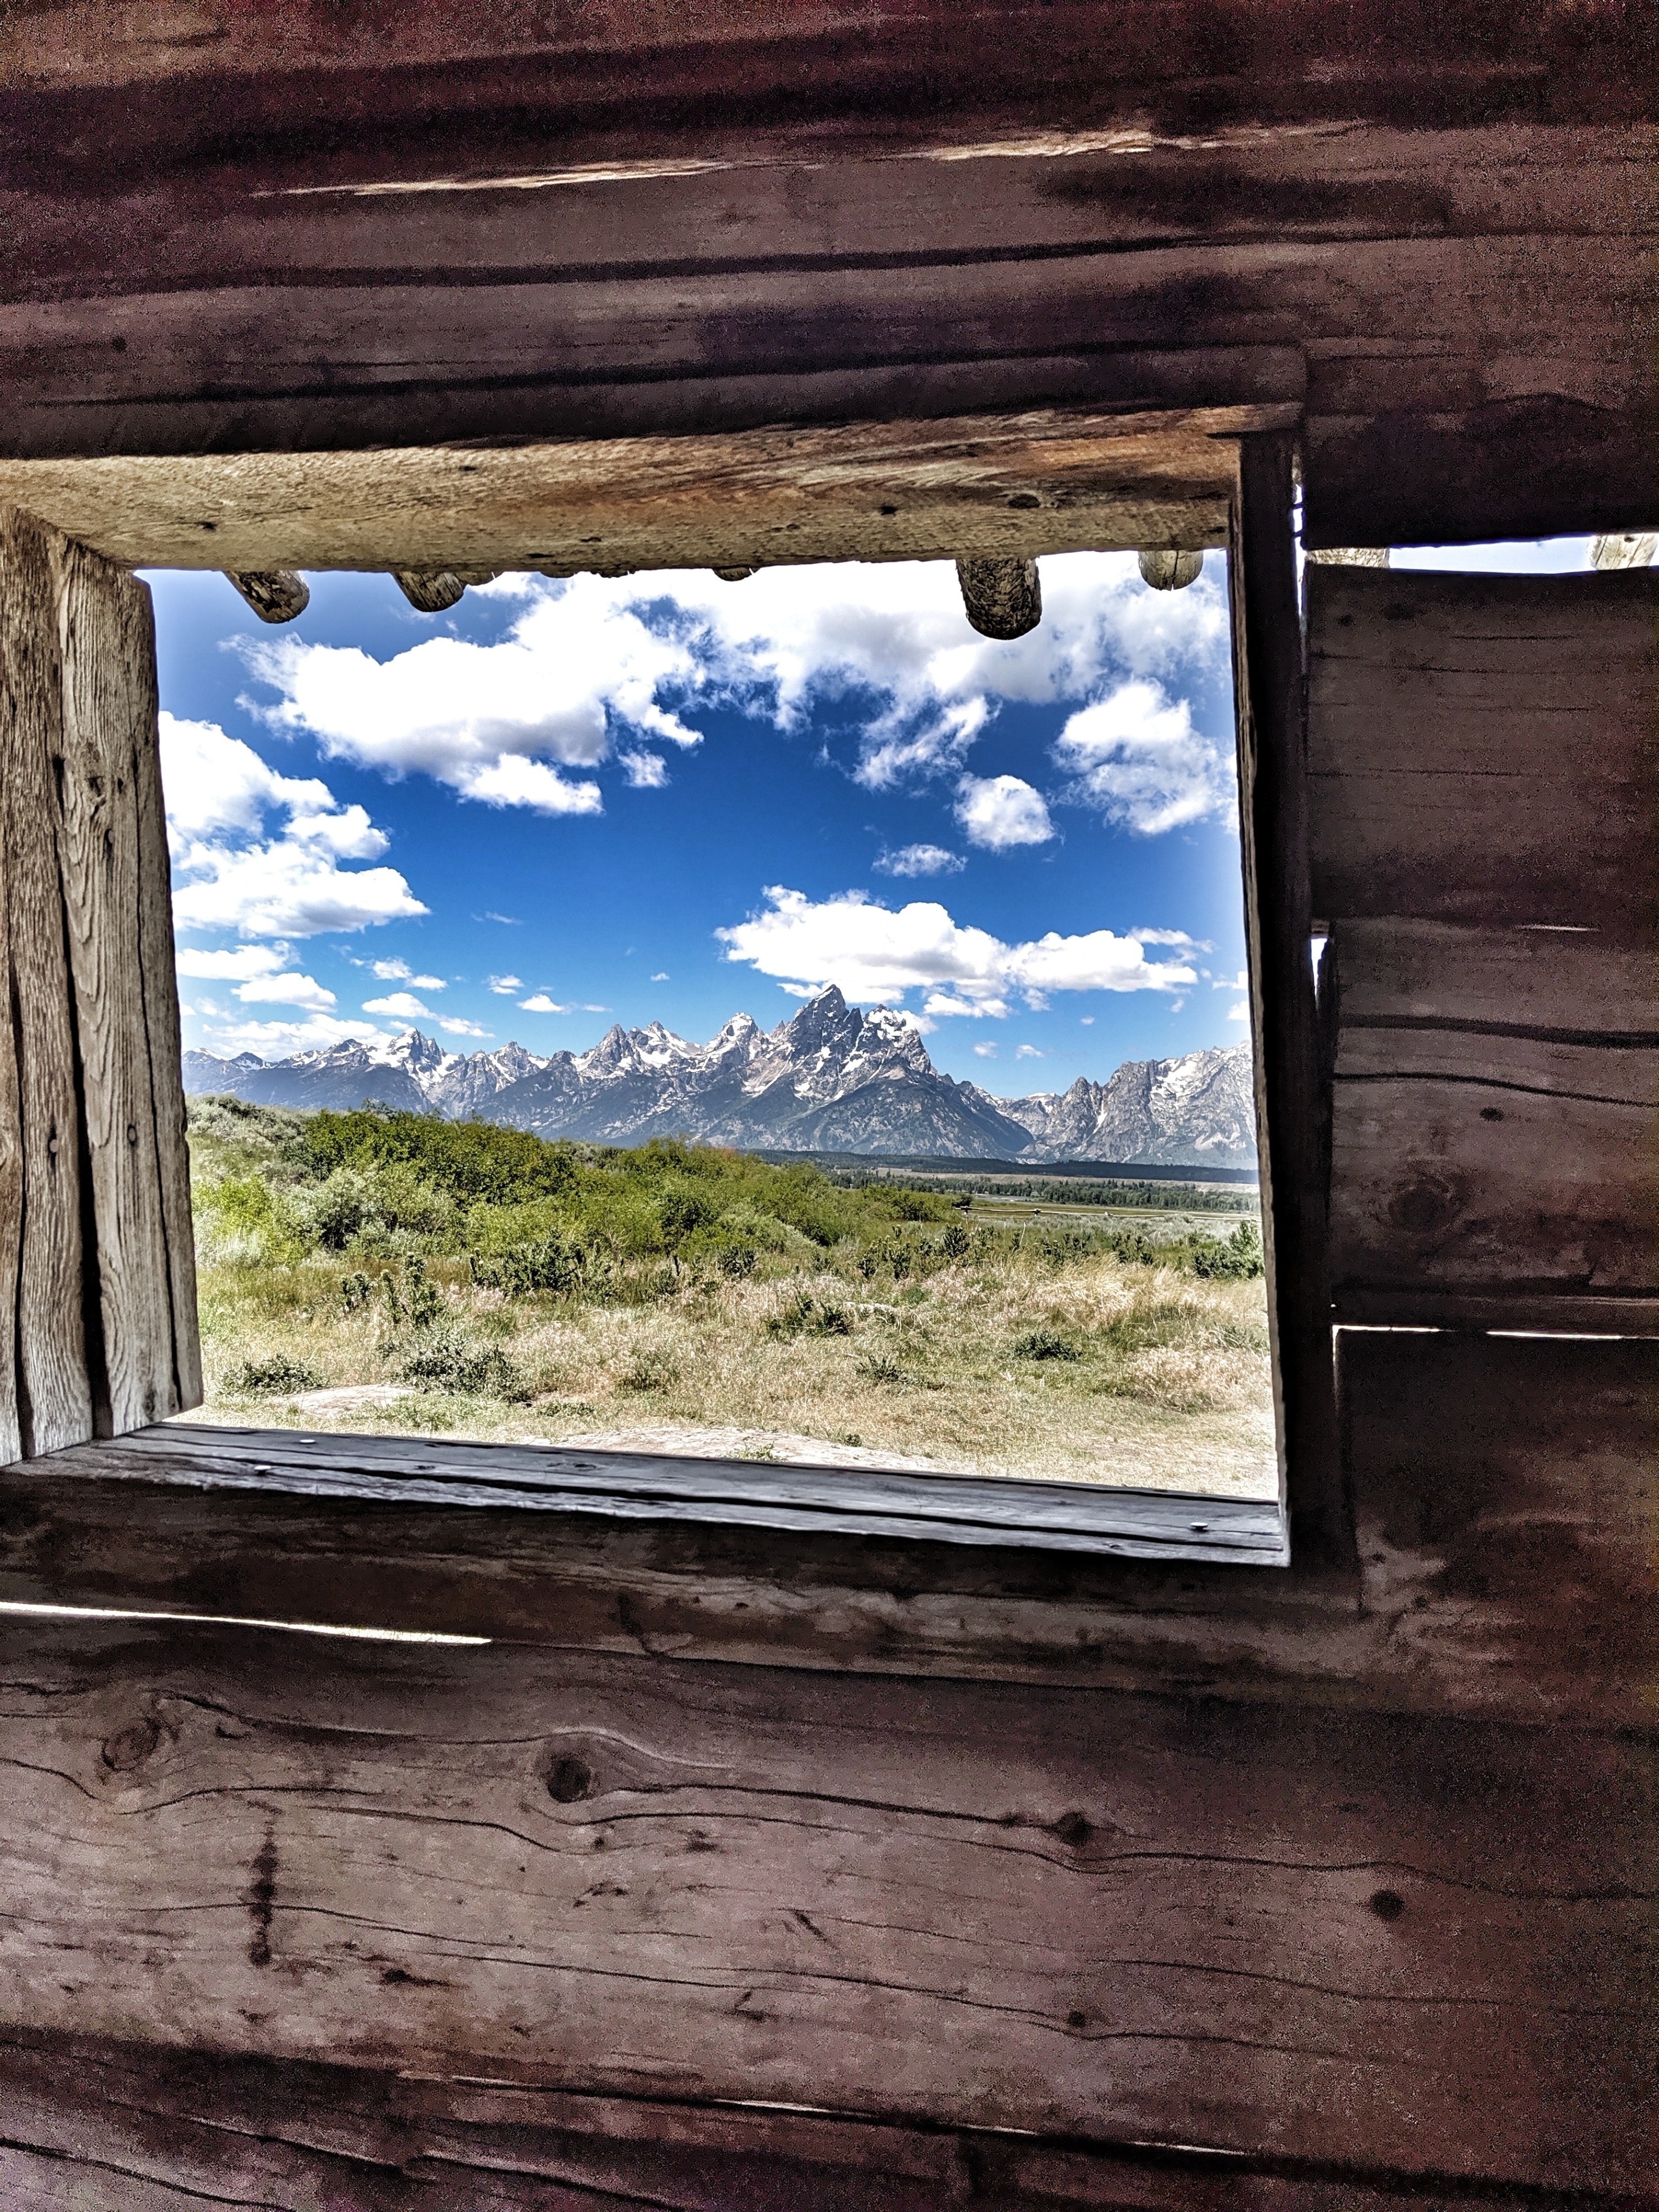 Talk about perfect window placement! Taken from inside the cabin, the Grand Tetons look so magestic, they don't look real! I could have sat for hours looking at that view .